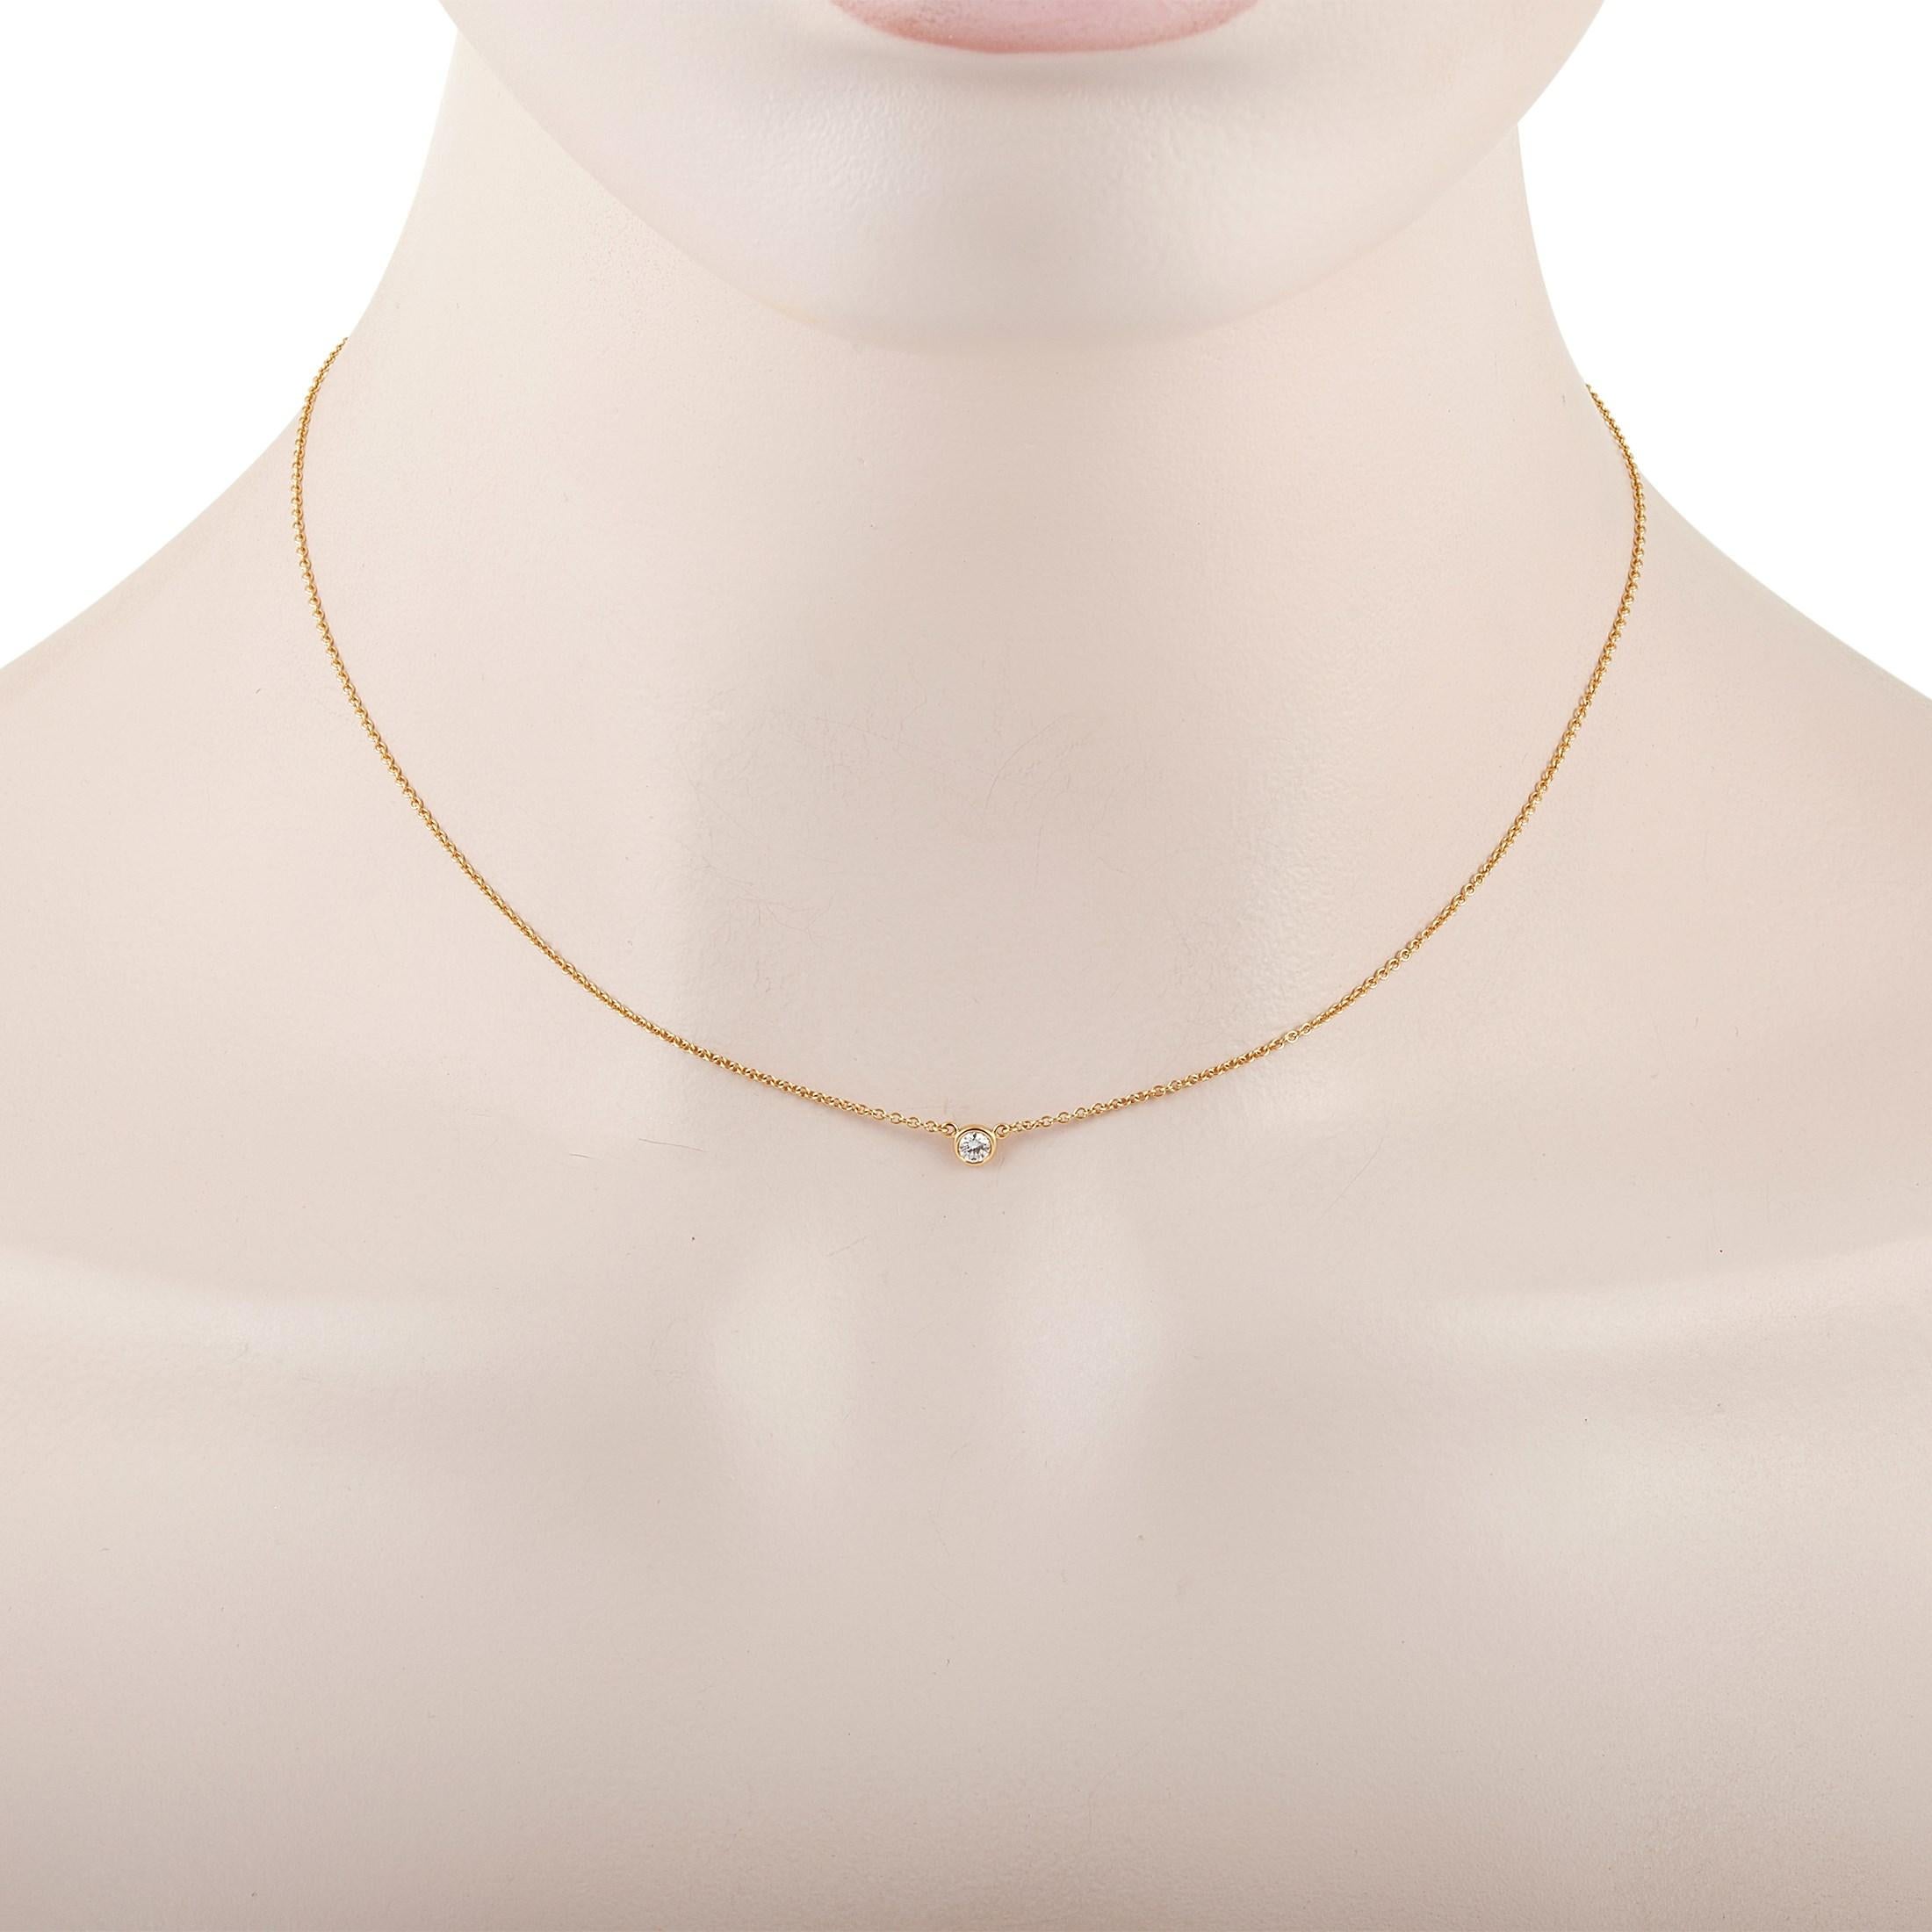 This classic Tiffany & Co. 18K Yellow Gold 0.10 ct Diamond necklace is made with 18K yellow gold and features a solitary 0.10 carat bezel-set diamond pendant. The delicate 18K Yellow Gold Chain measures 15 inches in length and features a spring-ring